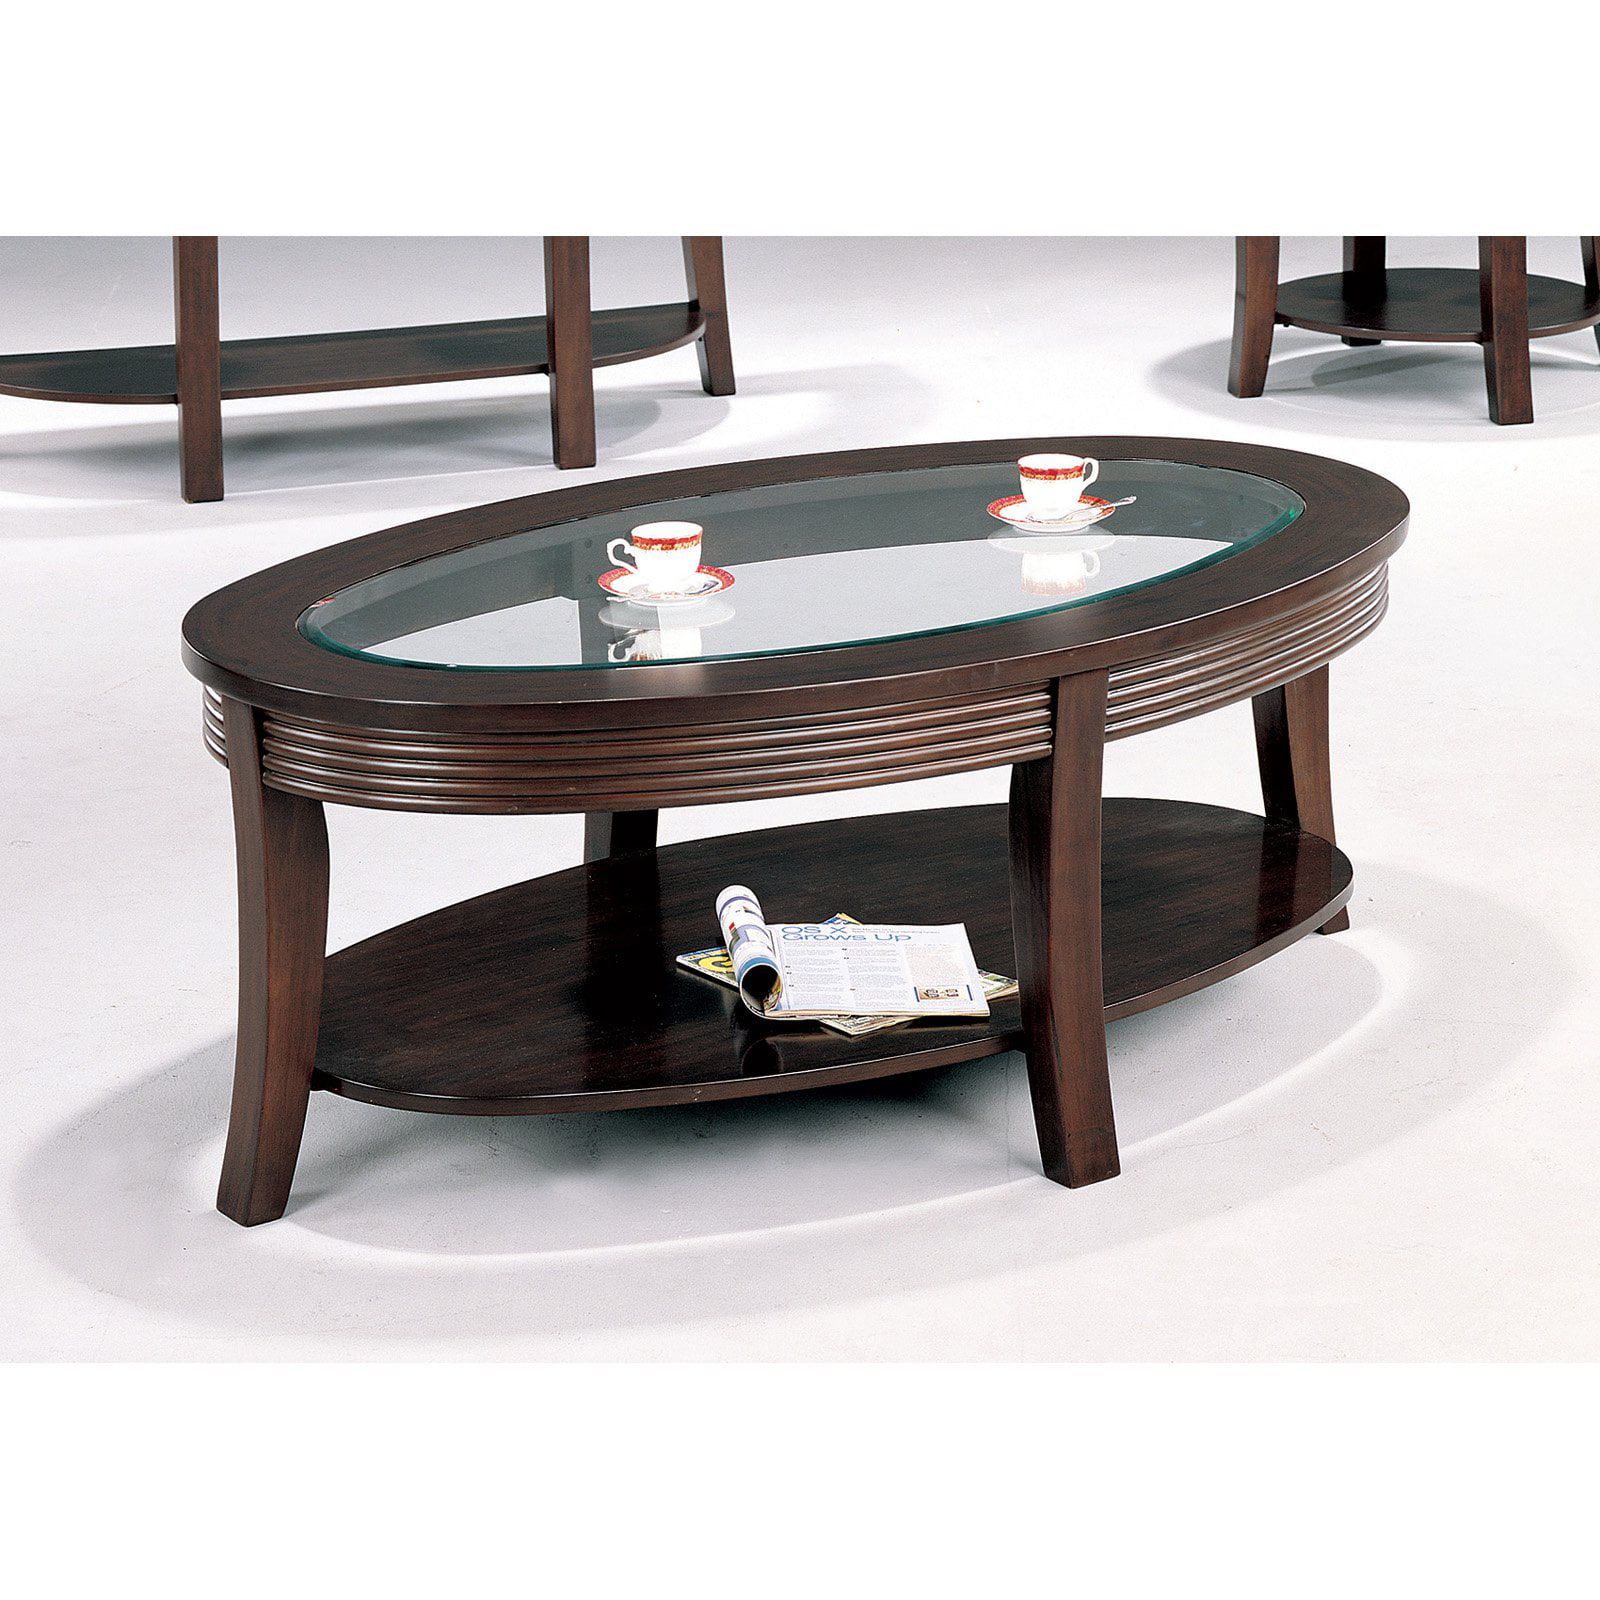 Coaster Furniture Oval Coffee Table With Glass Top – Cappuccino Throughout Oval Glass Coffee Tables (View 16 of 20)